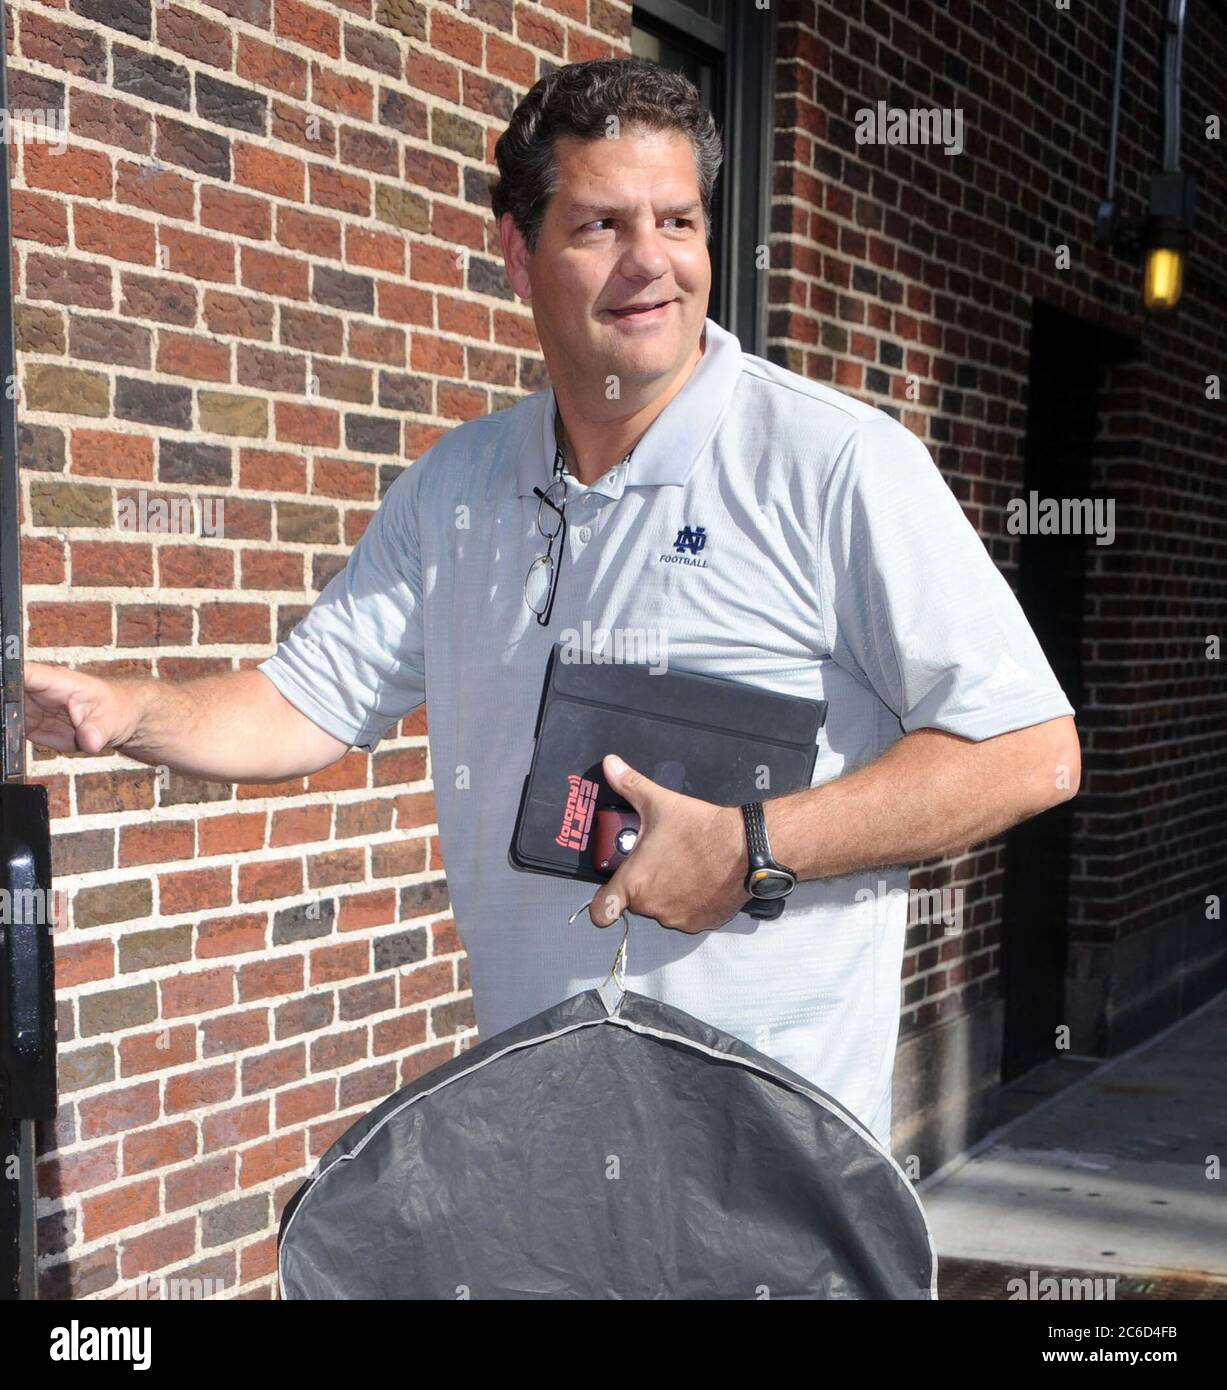 Manhattan, United States Of America. 10th Oct, 2011. NEW YORK, NY - OCTOBER 10: Television and radio host Mike Golic is seen arriving at the 'Late Show With David Letterman' at the Ed Sullivan Theater on October 10, 2011 in New York City. People: Mike Golic Credit: Storms Media Group/Alamy Live News Stock Photo